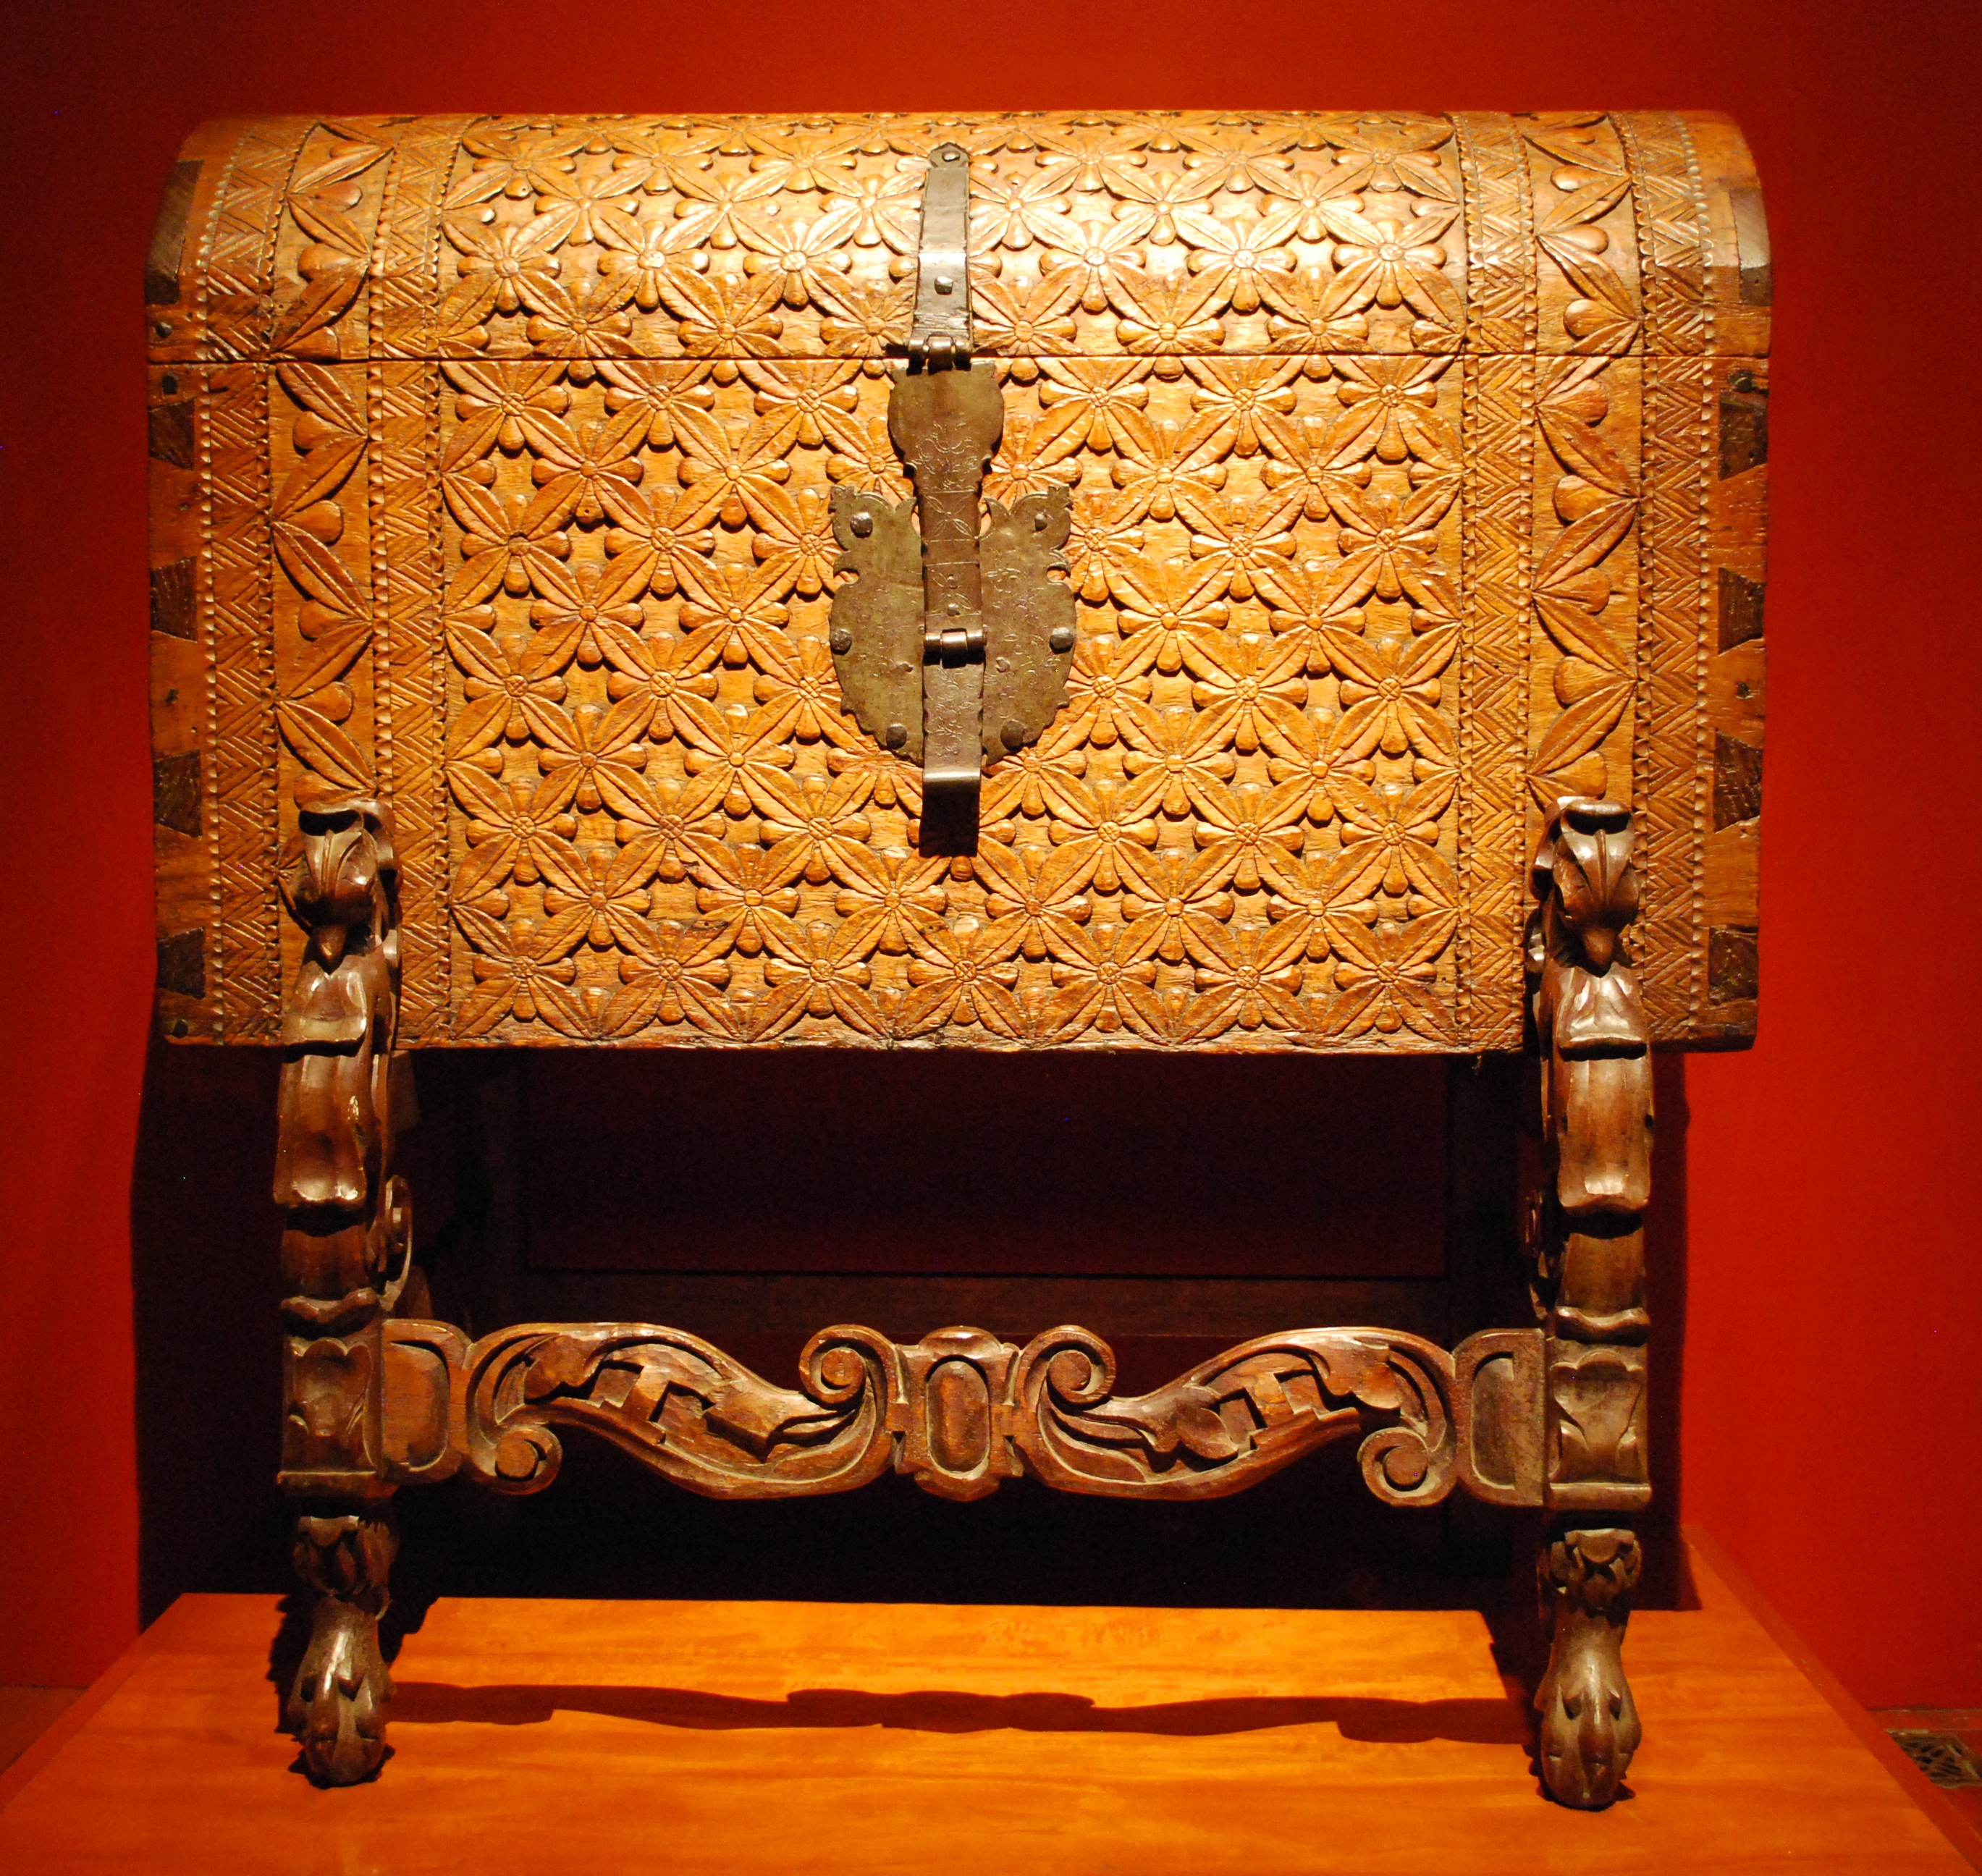 Chest (furniture) and its types